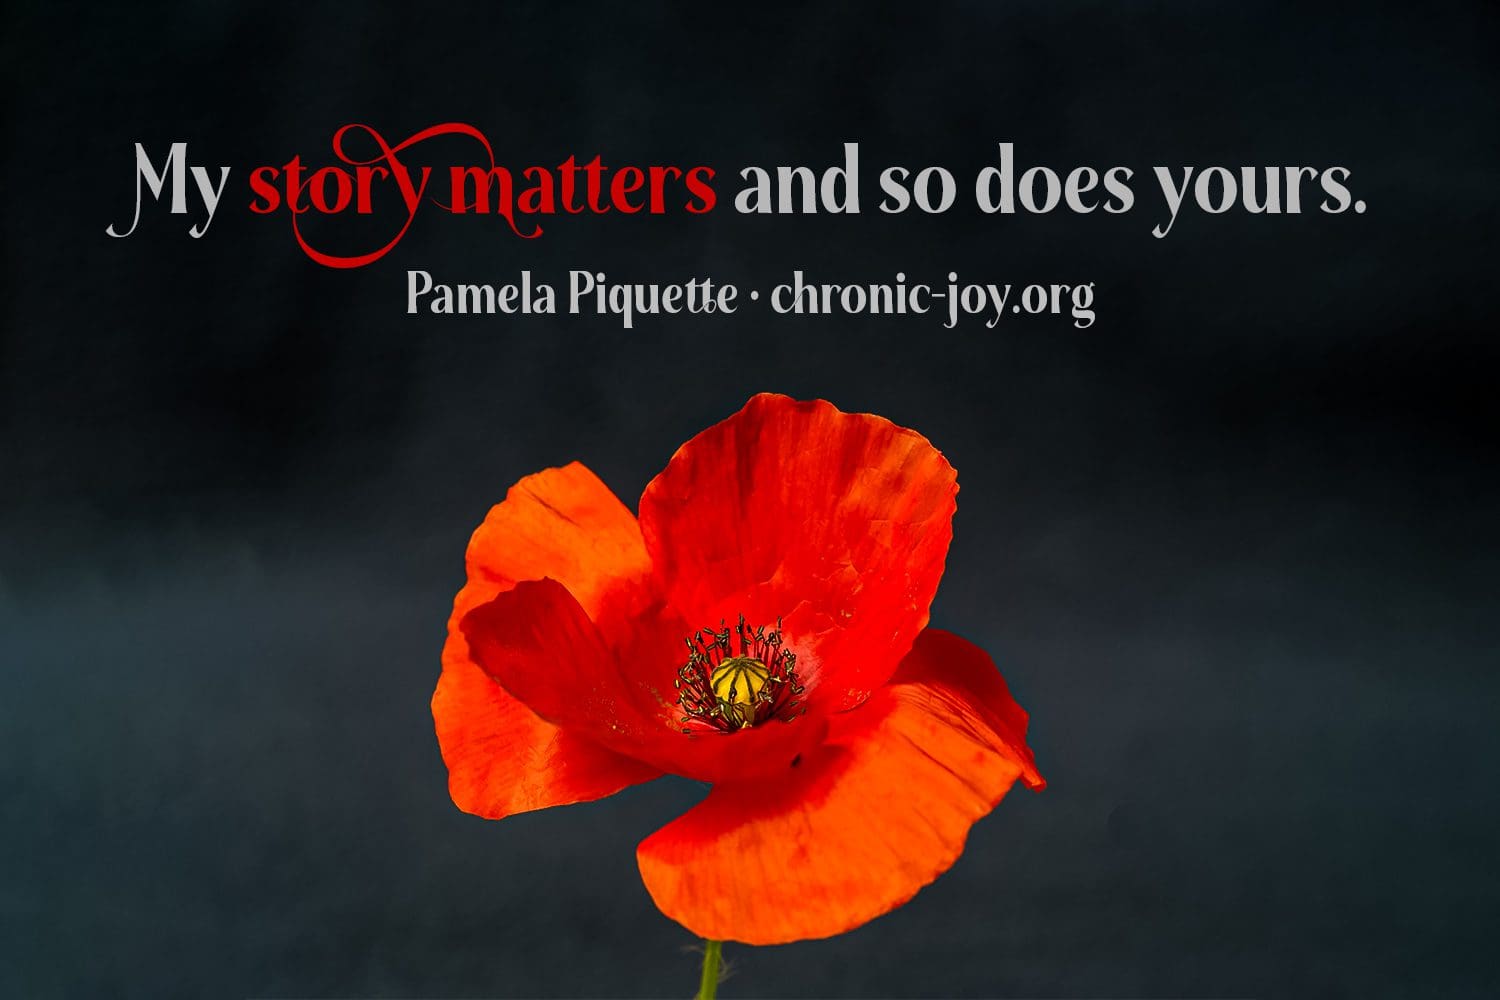 "My story matters and so does yours." Pamela Piquette